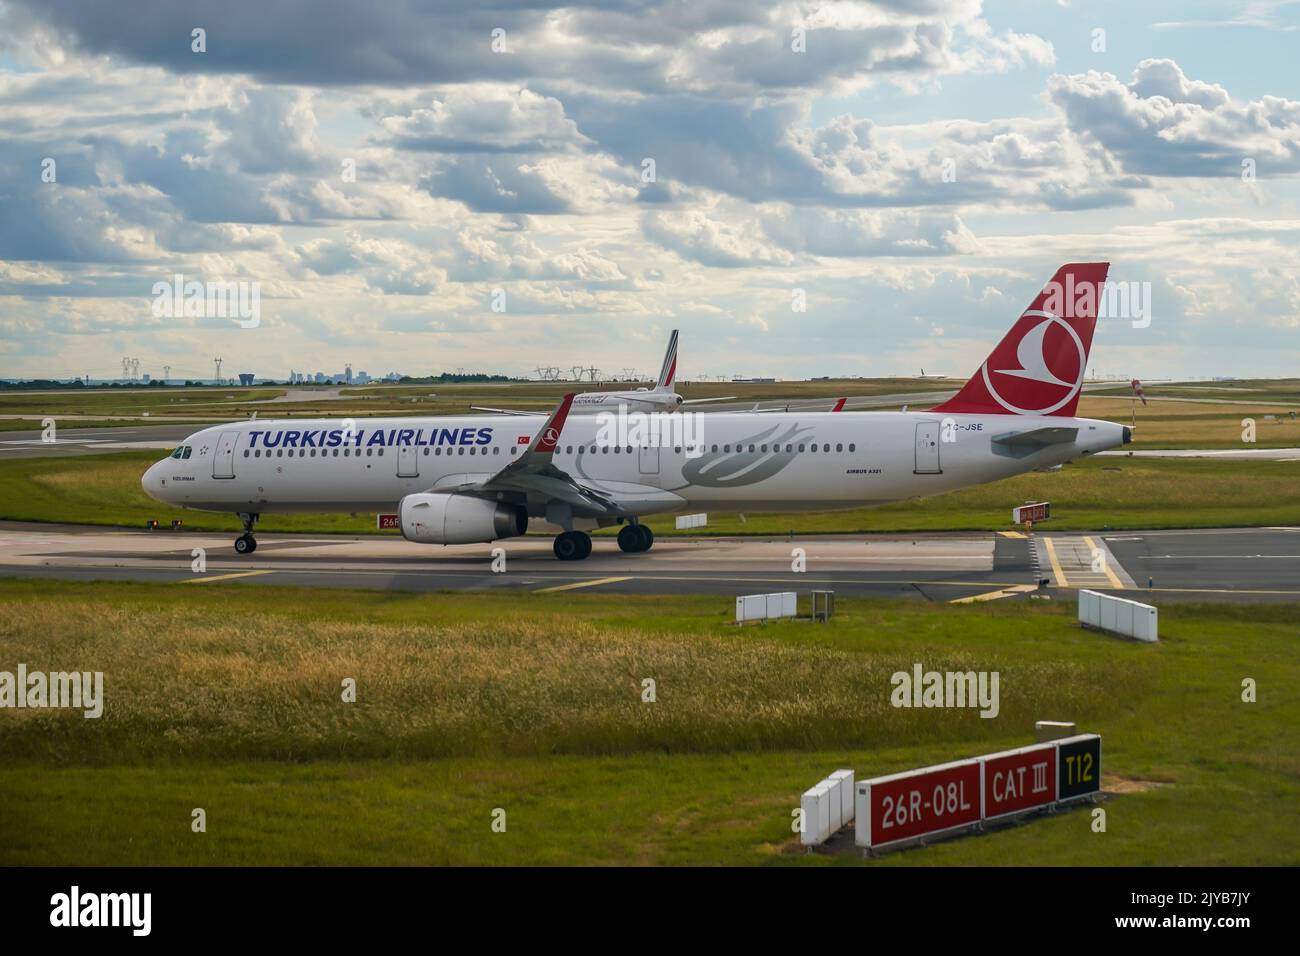 Turkish Airlines Airbus A321 on tarmac at Charles de Gaulle Airport in Paris. Turkish Airlines is the national flag carrier airline of Turkey Stock Photo